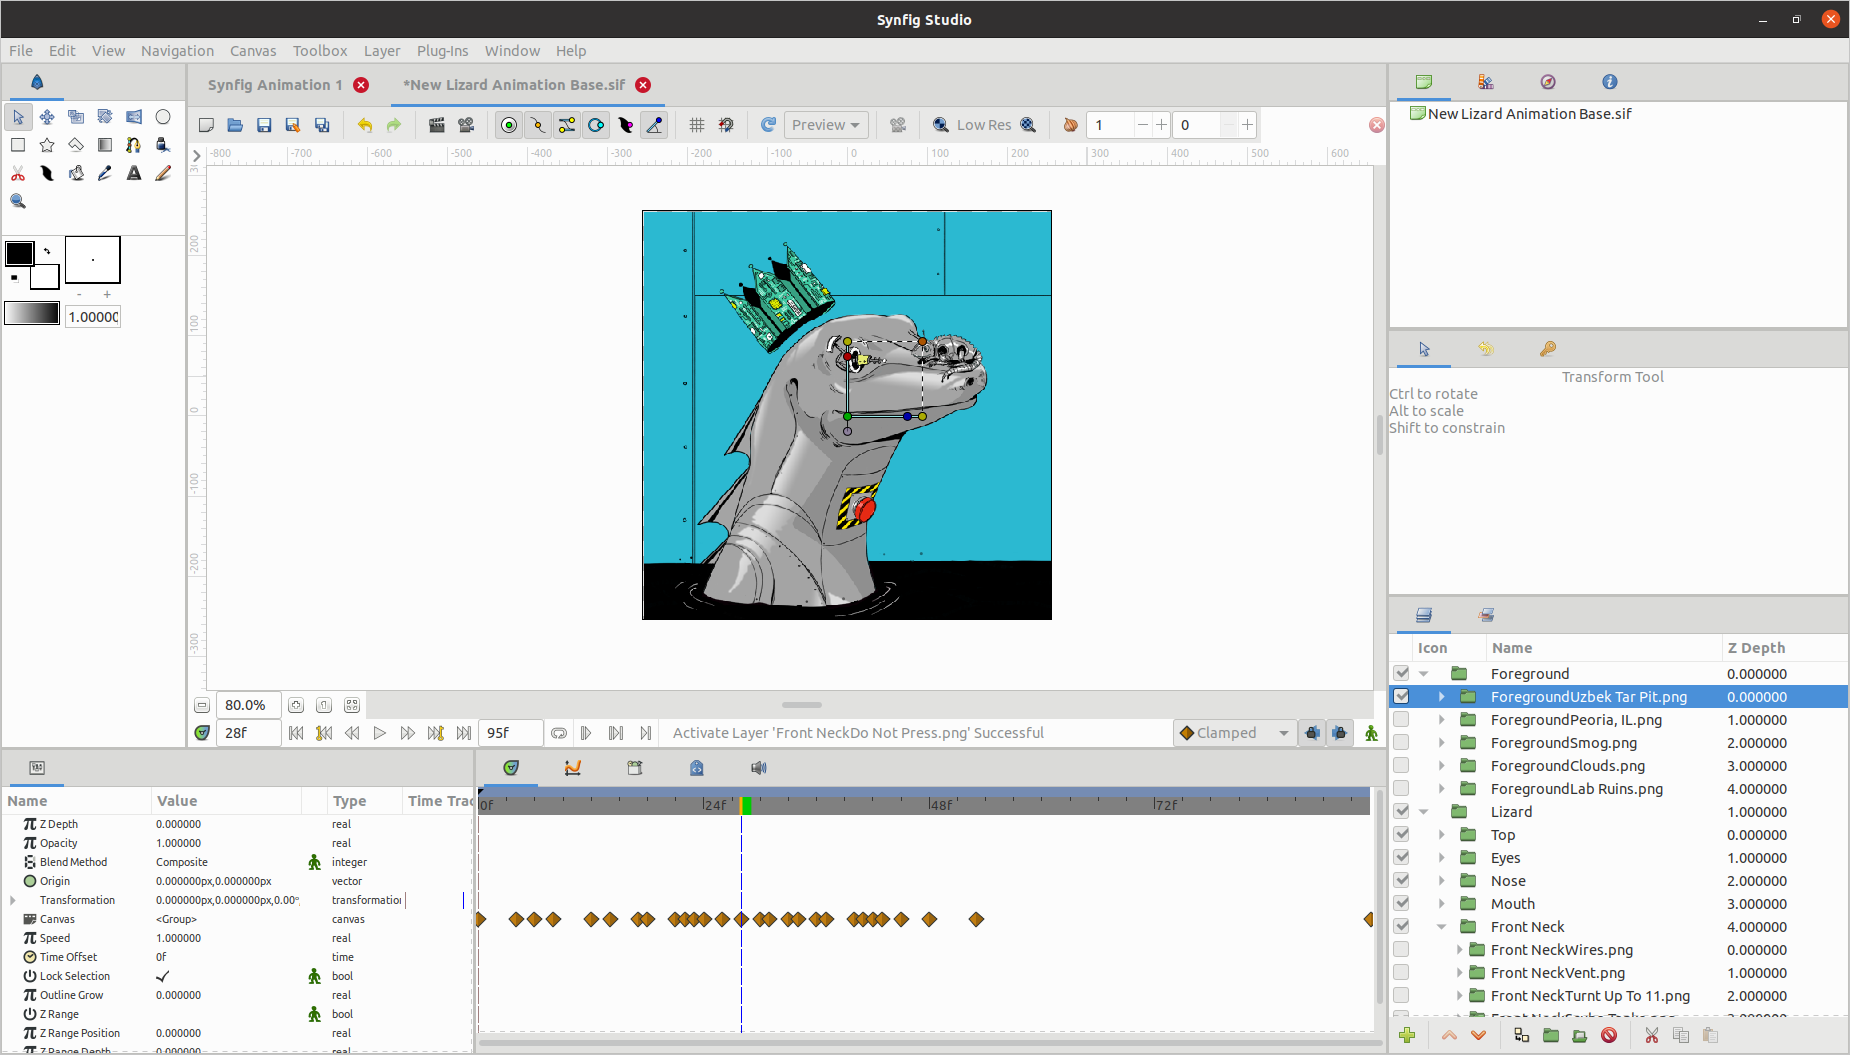 Synfig Studio's animation interface